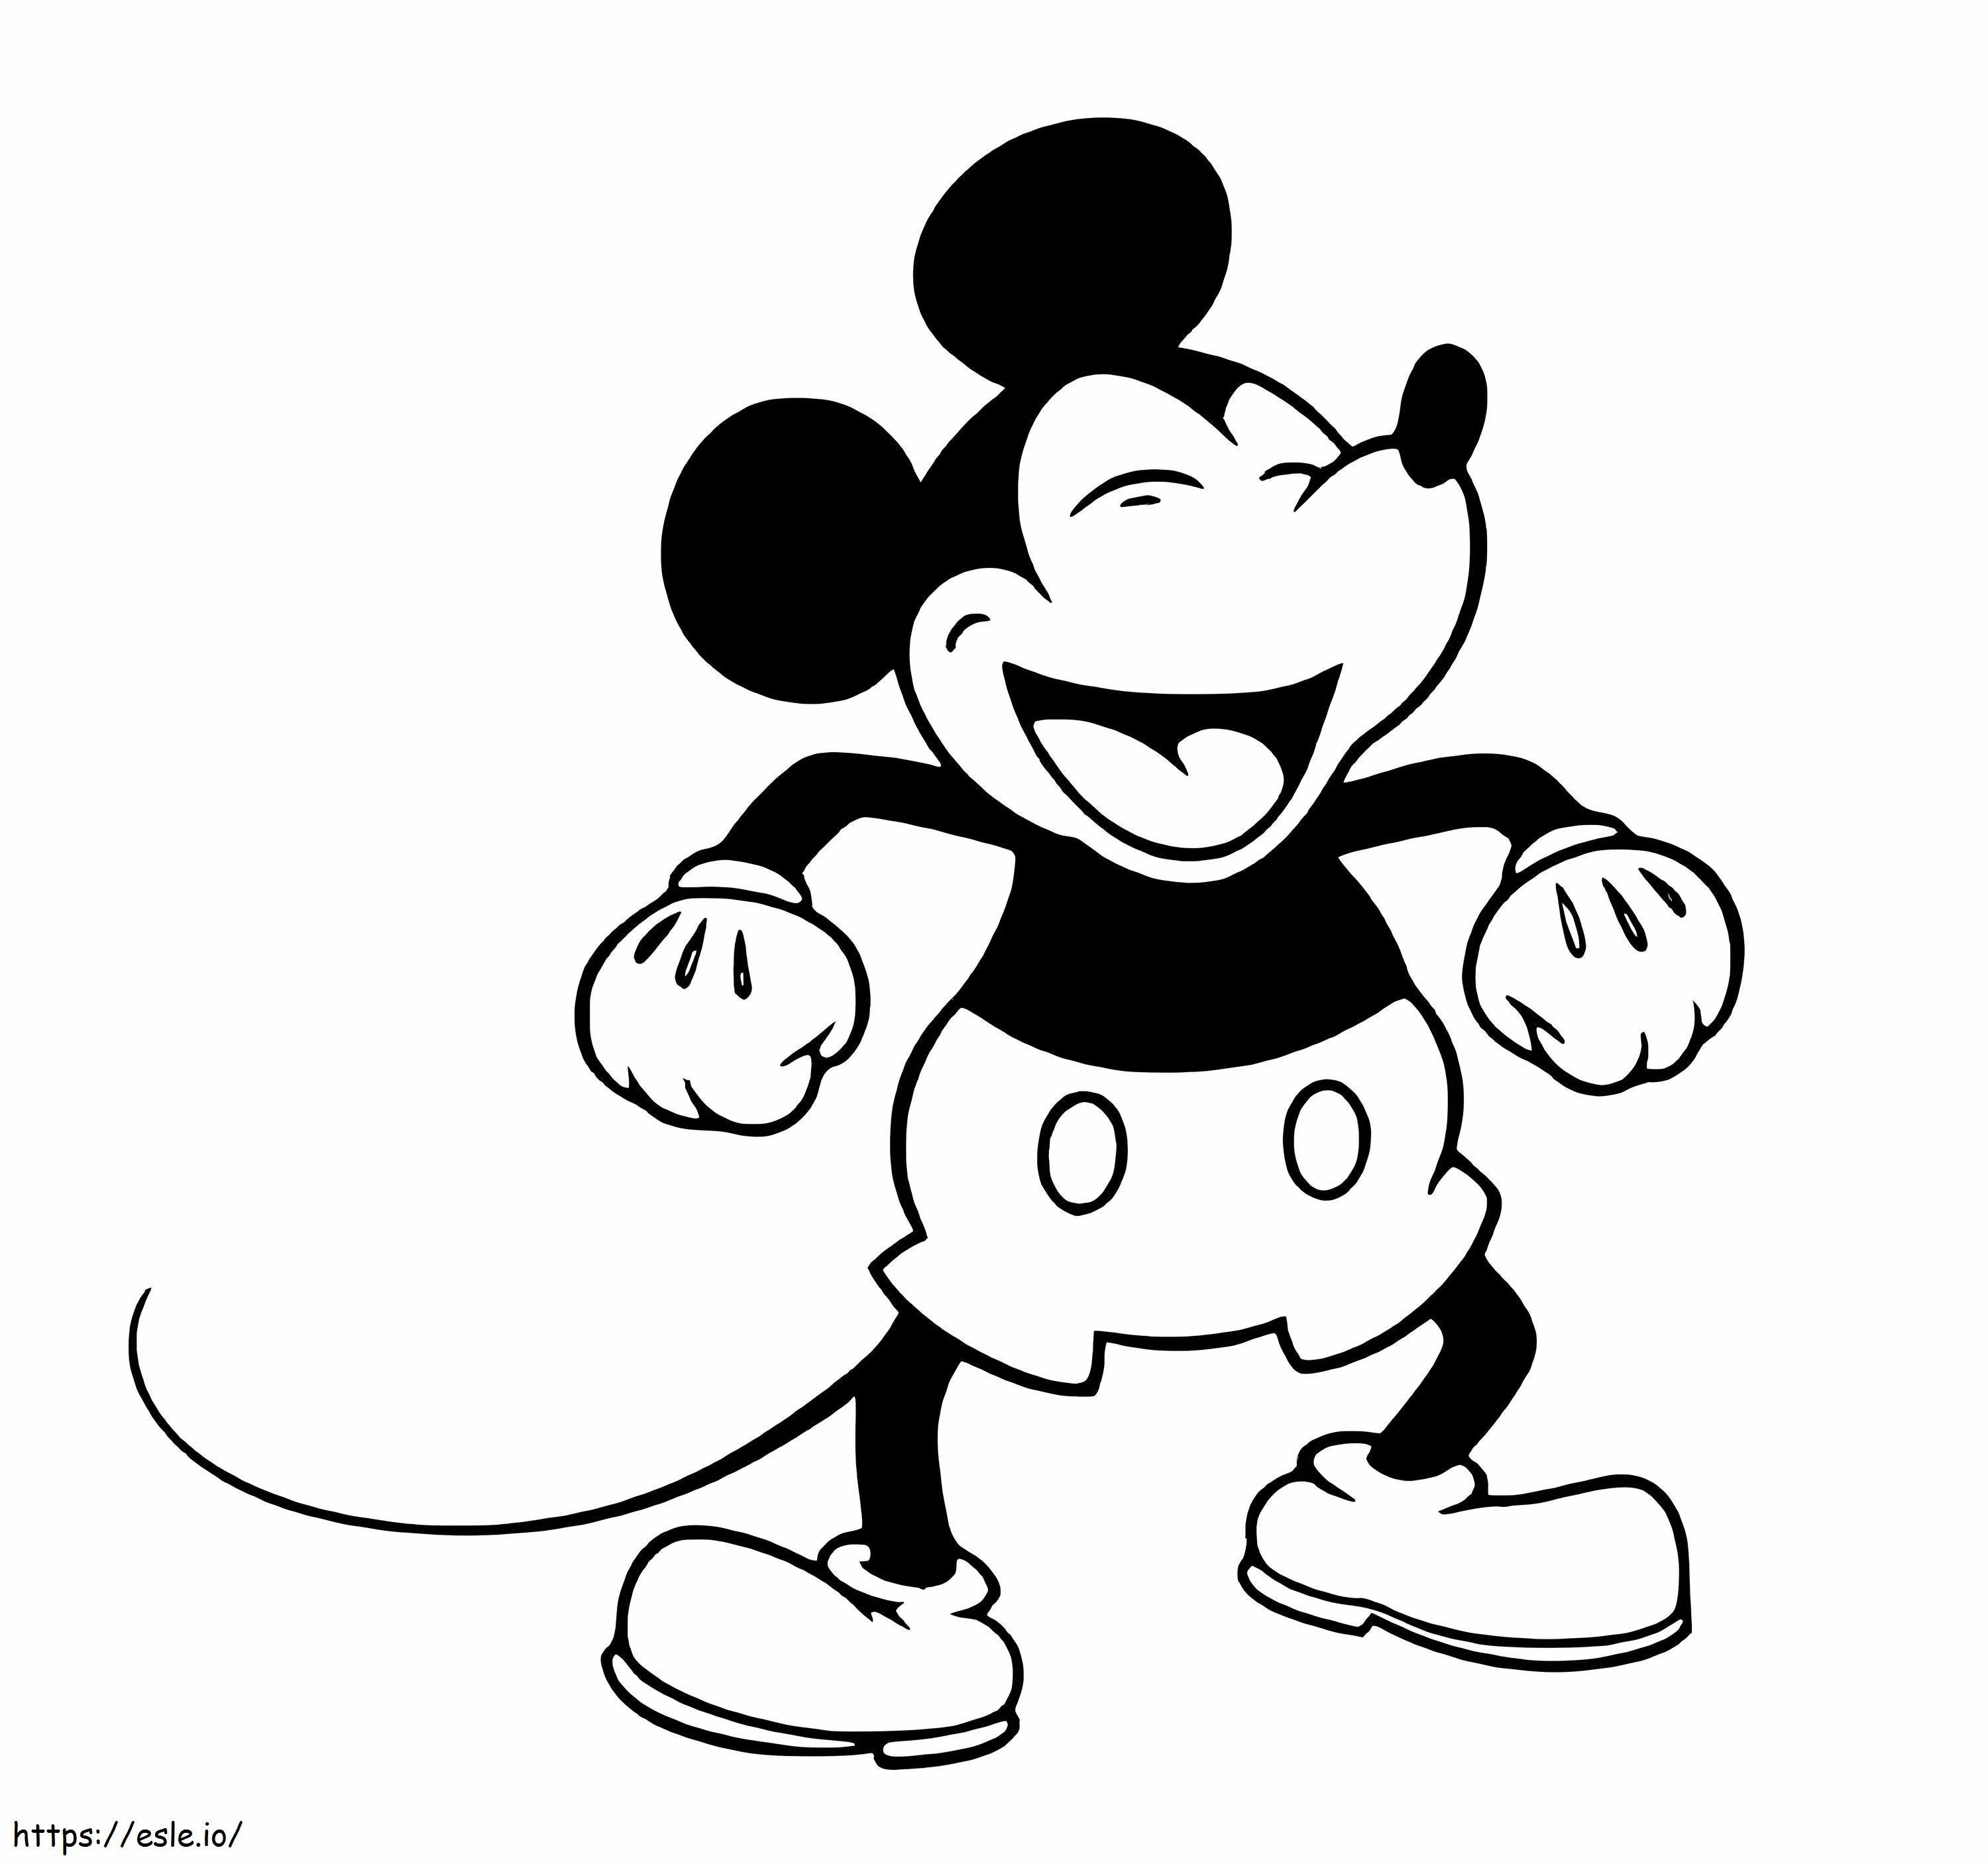 Mickey Mouse Laughing coloring page